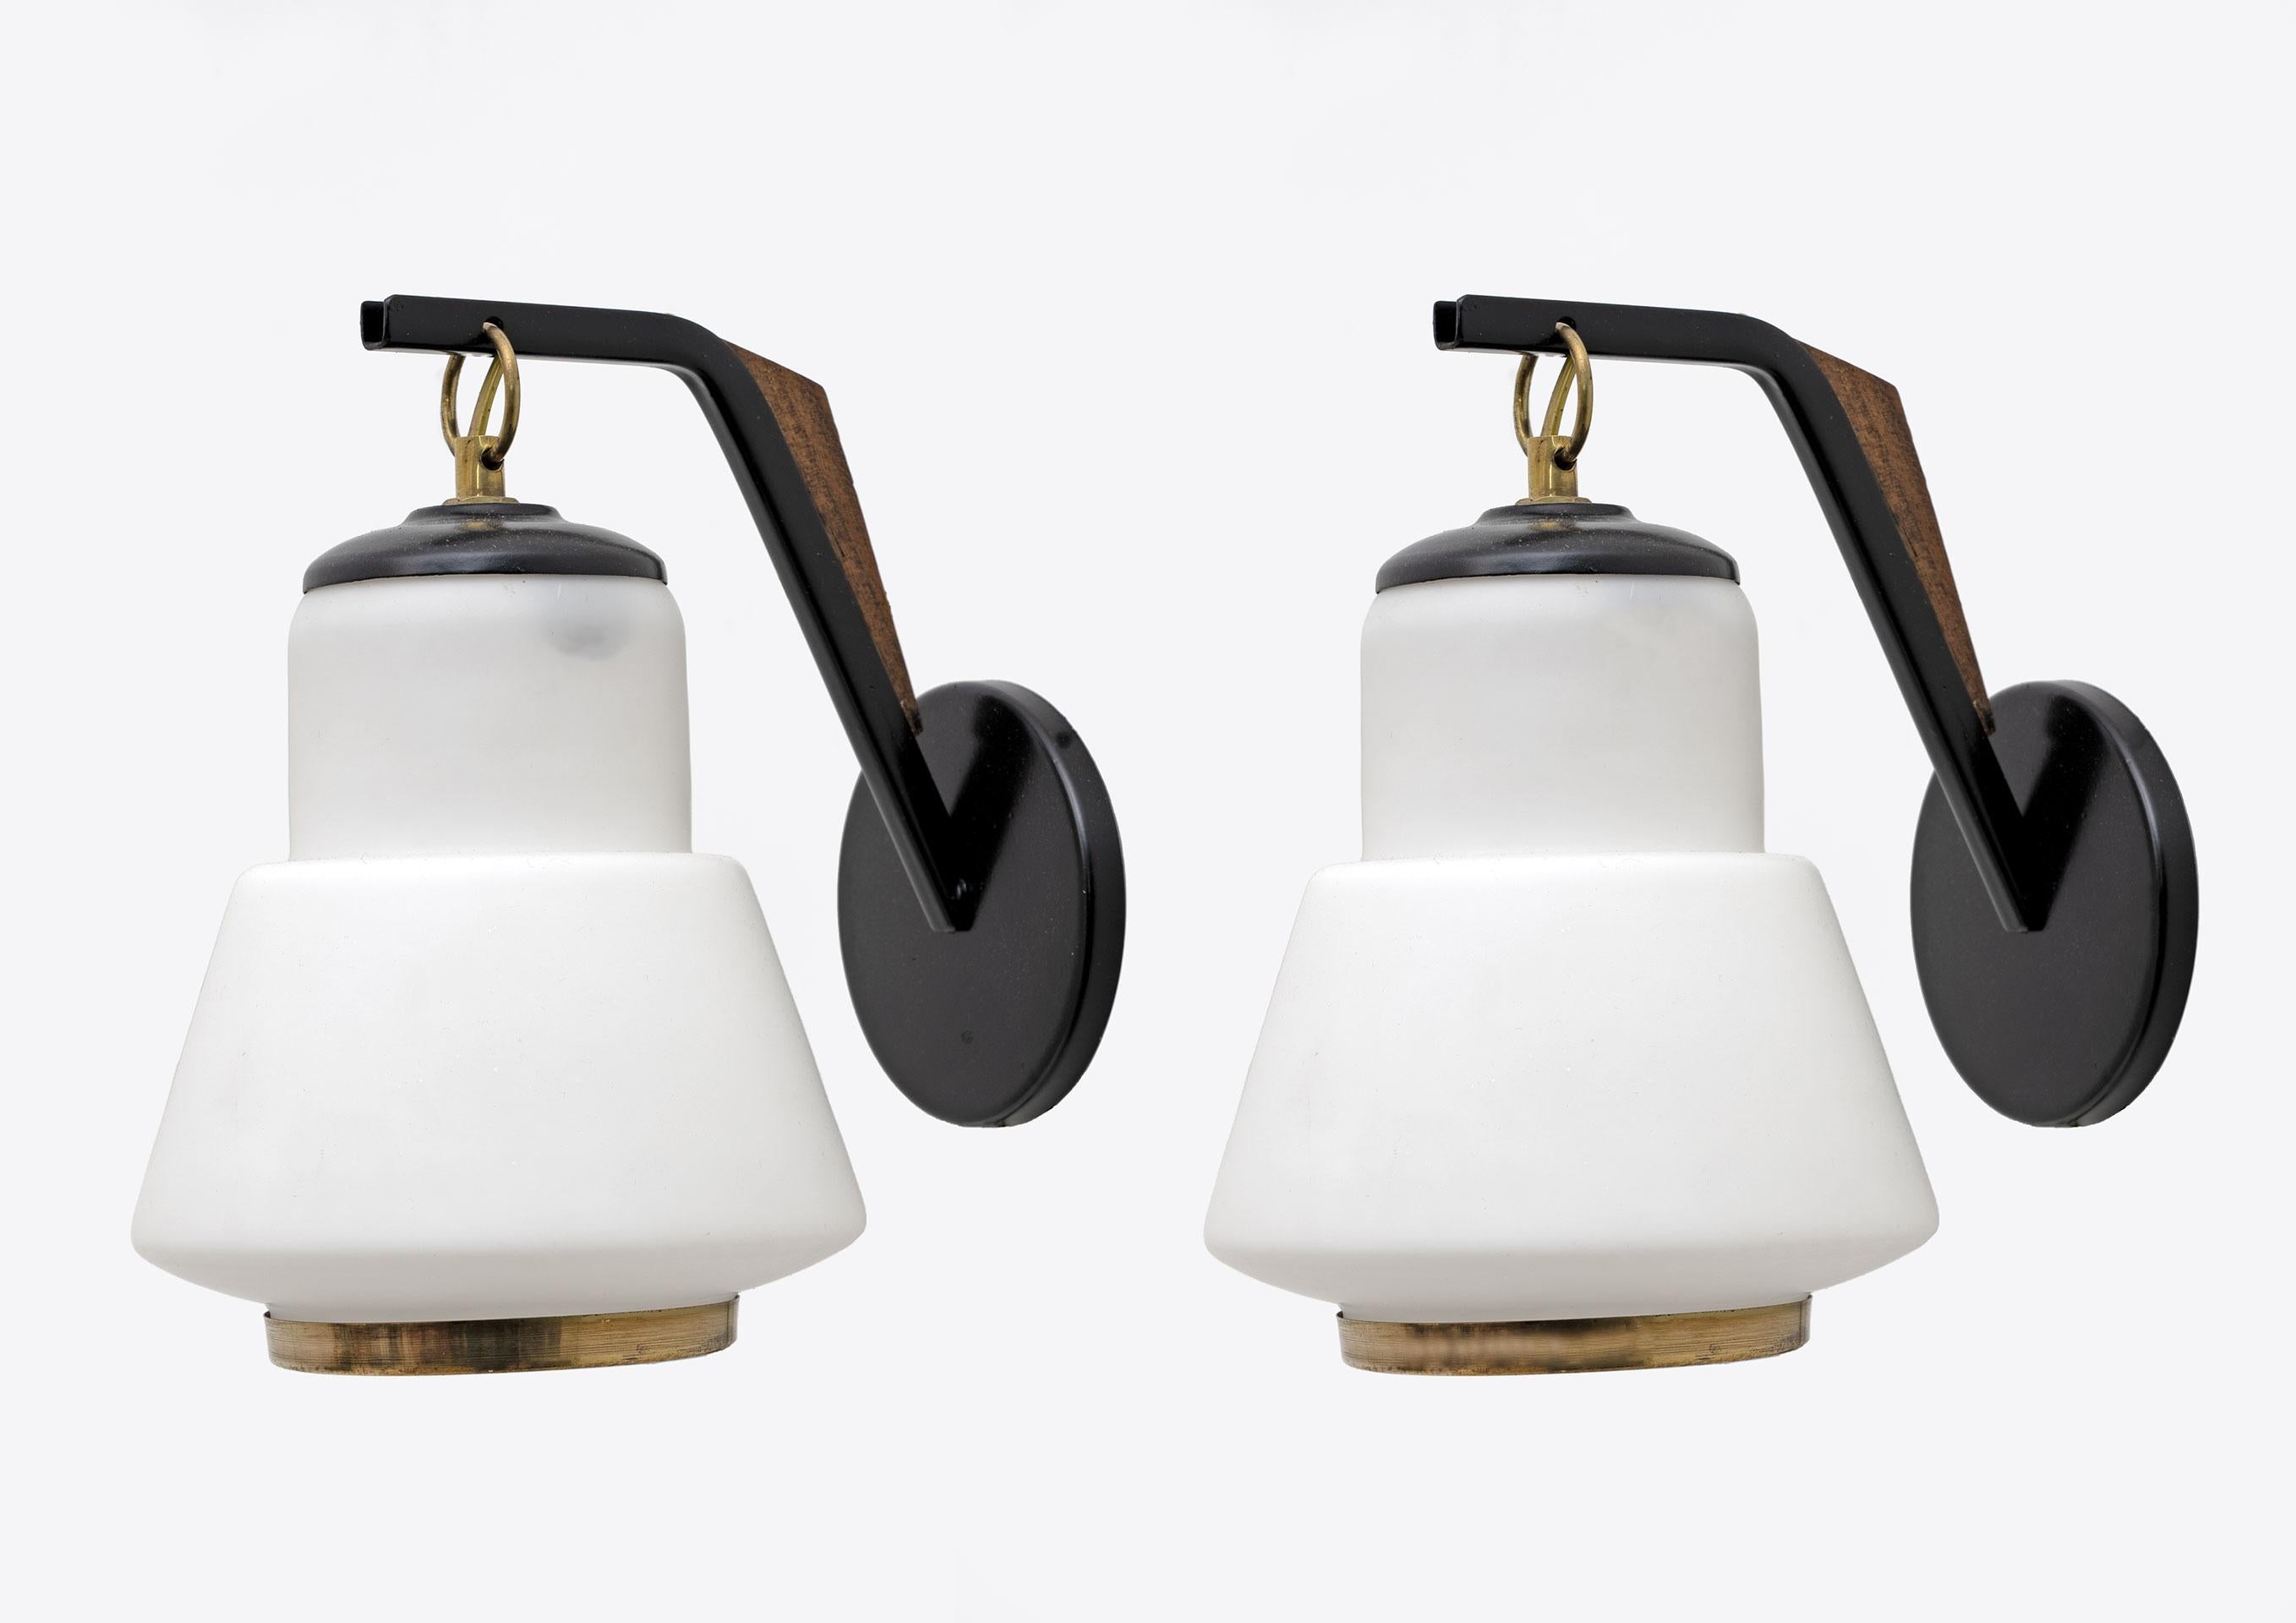 Pair of wall lights in black lacquered metal, wood, brass and opaline glass. In the style of Stilnovo in Italy in the 1950s.